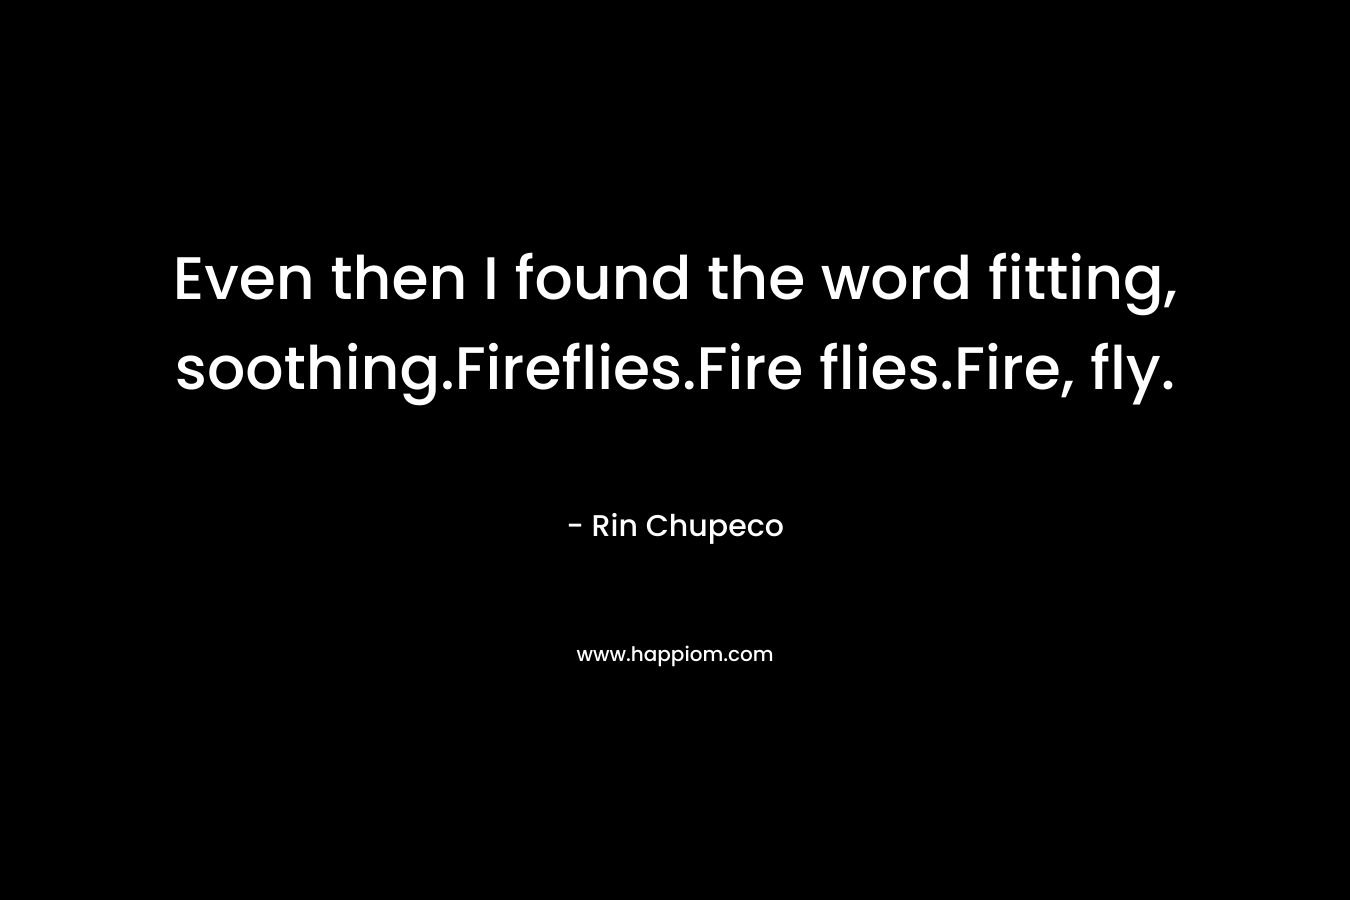 Even then I found the word fitting, soothing.Fireflies.Fire flies.Fire, fly. – Rin Chupeco